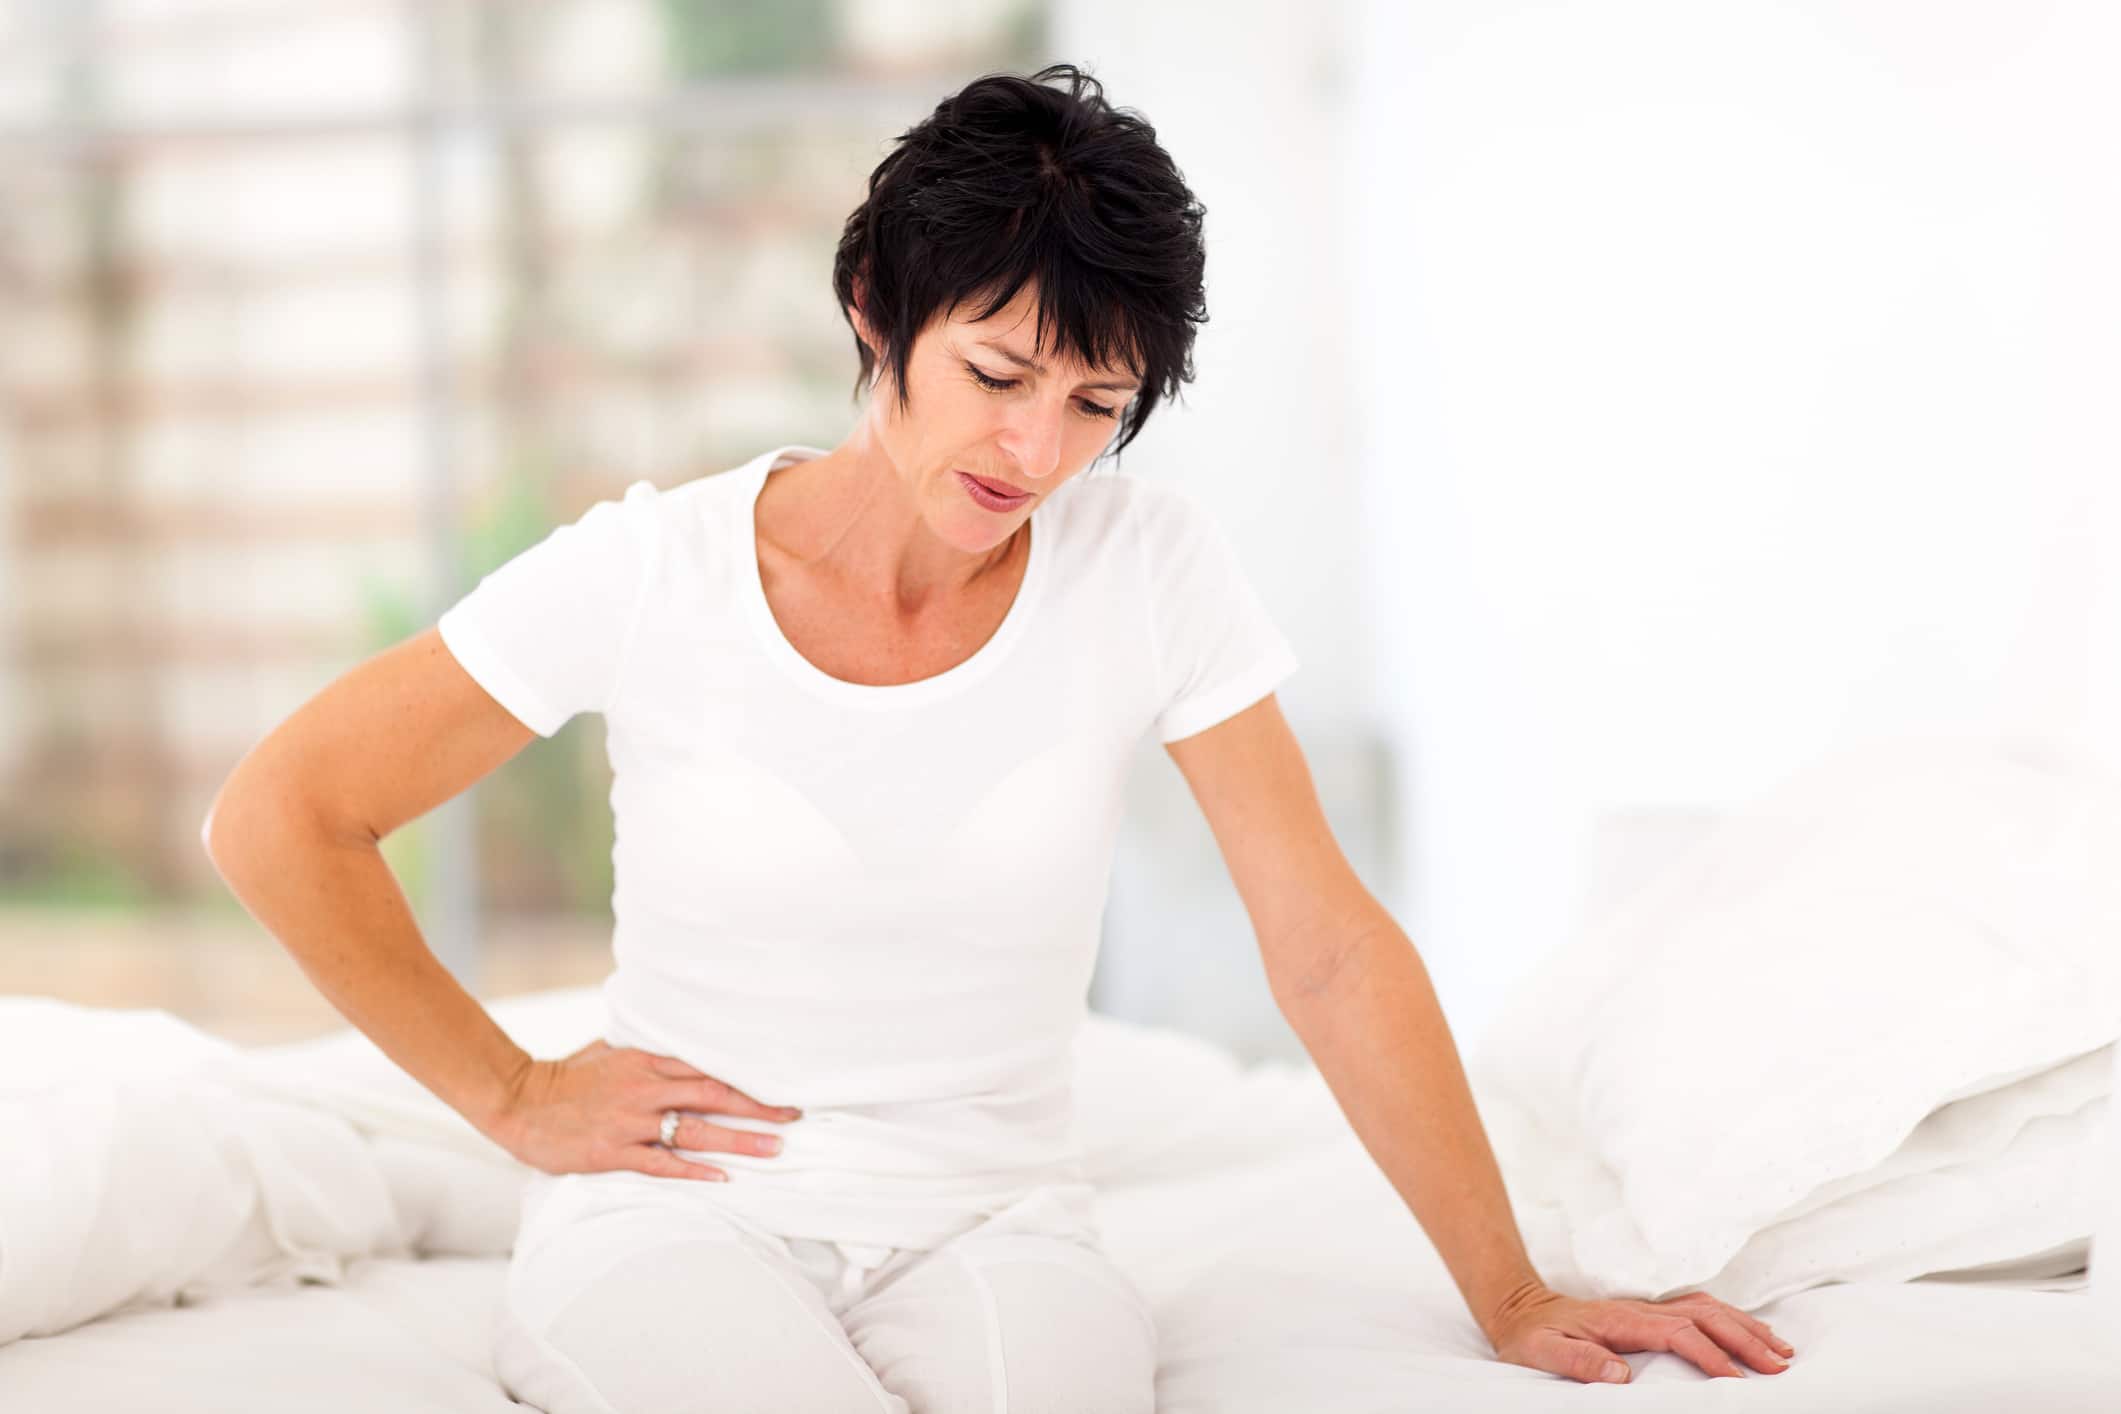 An image of a mature woman with a stomach ache sitting on a bed.